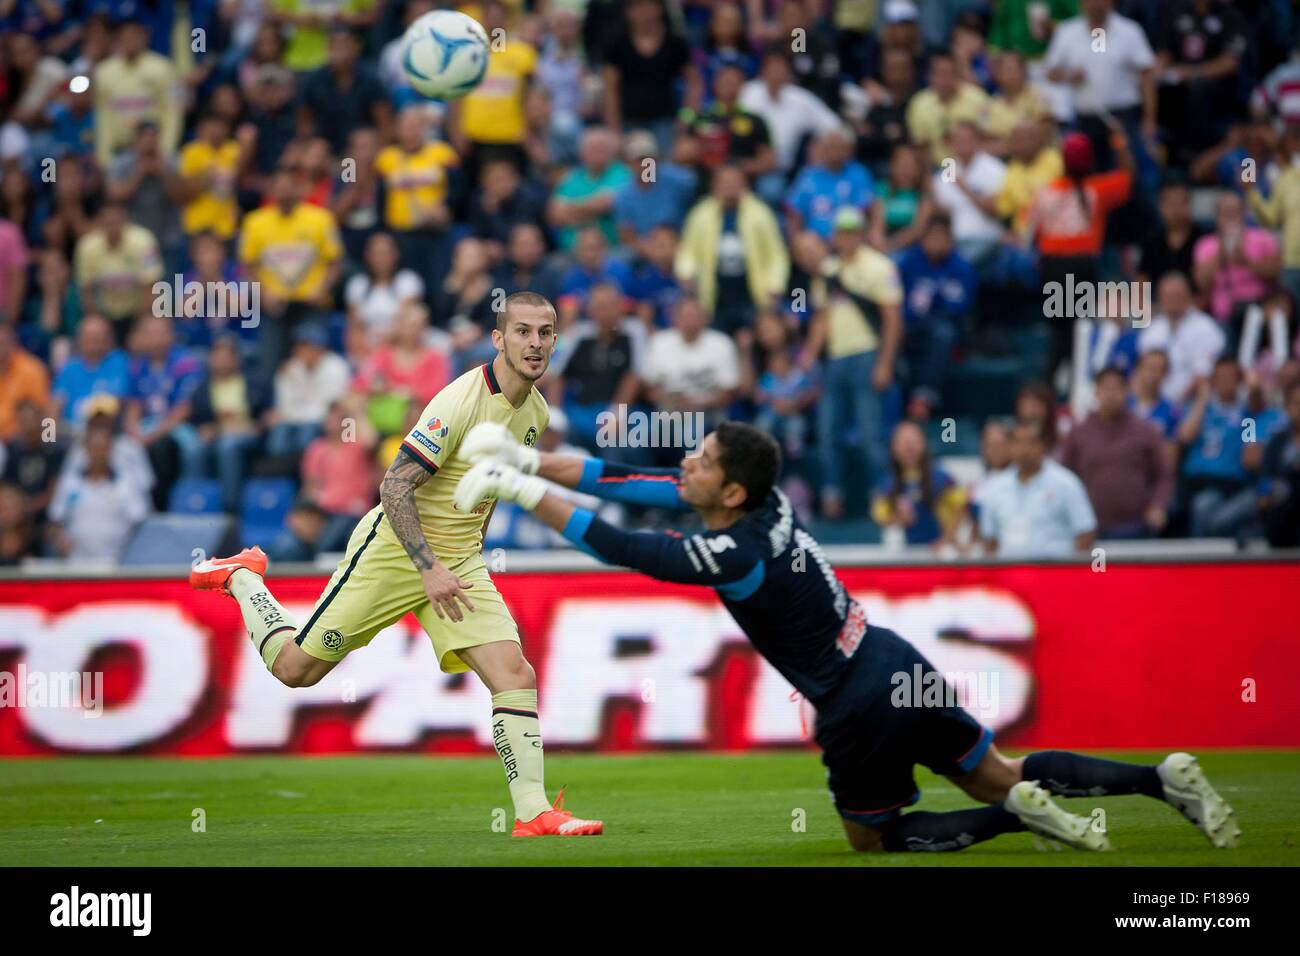 Mexico City, Mexico. 29th Aug, 2015. Cruz Azul's goalkeeper Jesus Corona (R) vies the ball with America's Dario Benedetto during the match of the 2015 Opening Tournament of the MX League in the Azul Stadium, in Mexico City, capital of Mexico, on Aug. 29, 2015. America won the match. © Pedro Mera/Xinhua/Alamy Live News Stock Photo